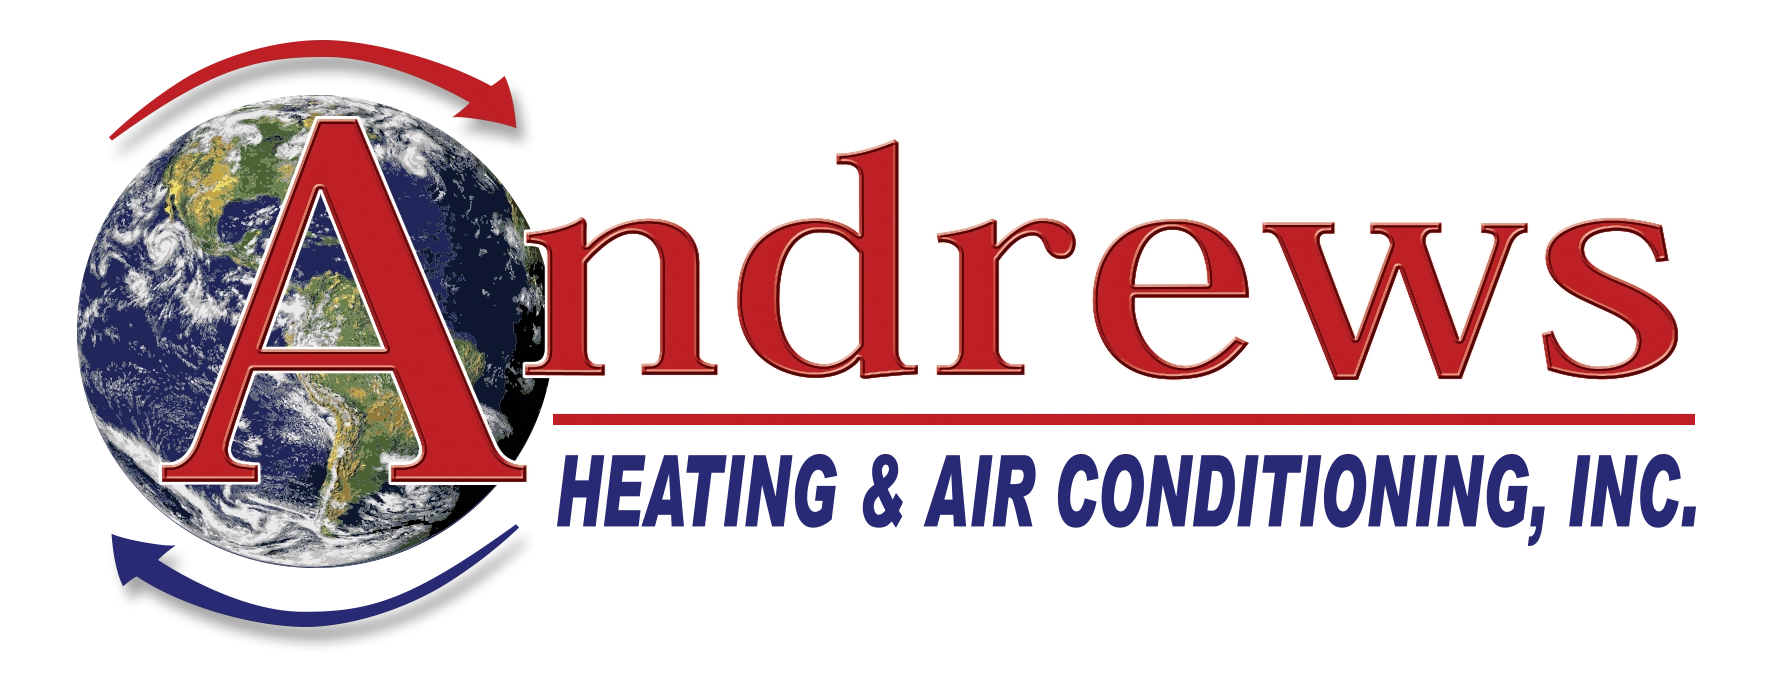 Andrews Heating & Air Conditioning, Inc. Logo